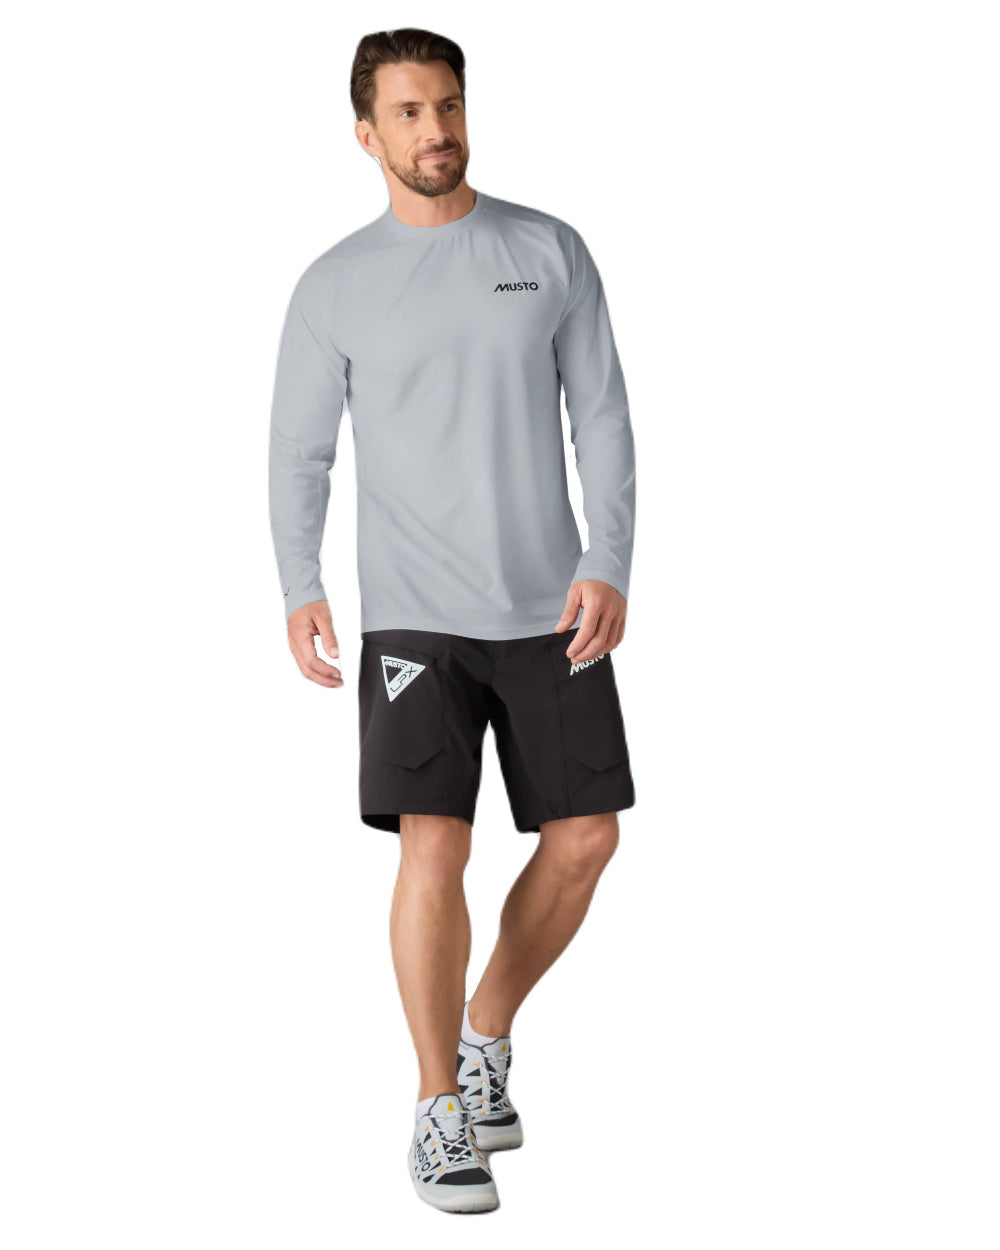 Grey Melange Coloured Musto Mens LPX Cooling Long Sleeve T-Shirt On A White Background 